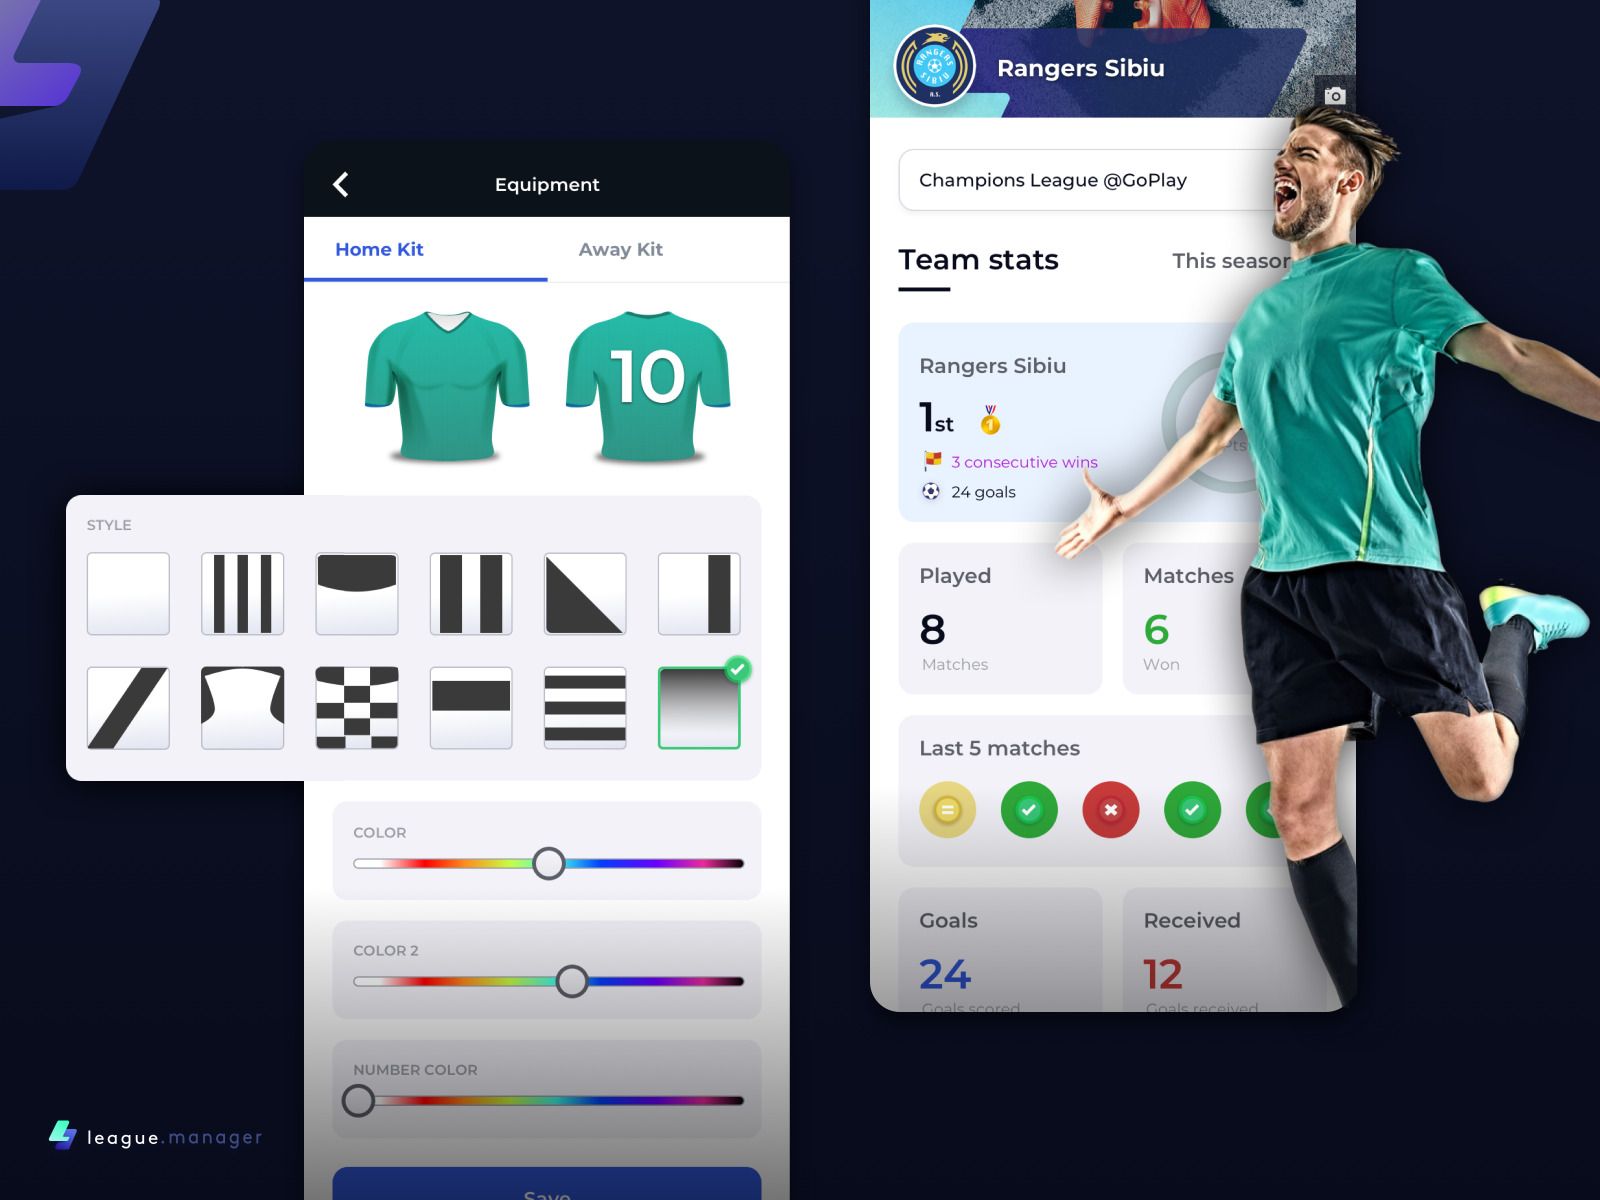 Team Profile in sports league management app (*image by [Liviu Anghelina](https://dribbble.com/liviuanghelina){ rel="nofollow" target="_blank" .default-md}*)